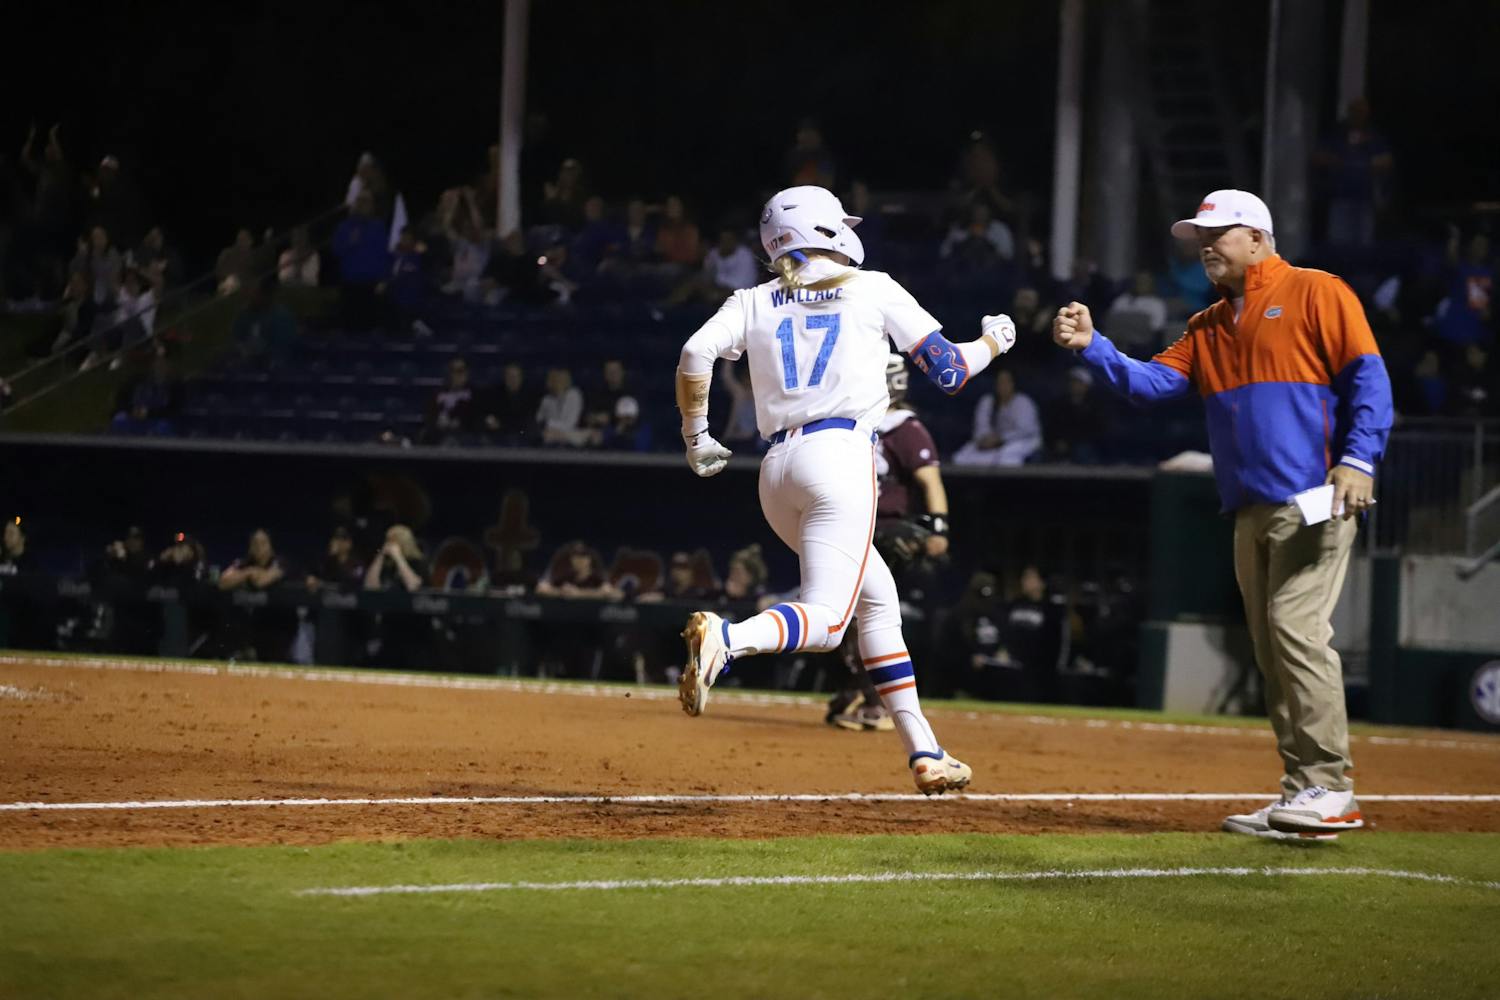 Redshirt junior Skylar Wallace rounds third after launching a home run to center field. Florida takes on conference rival Tennessee in a weekend series.